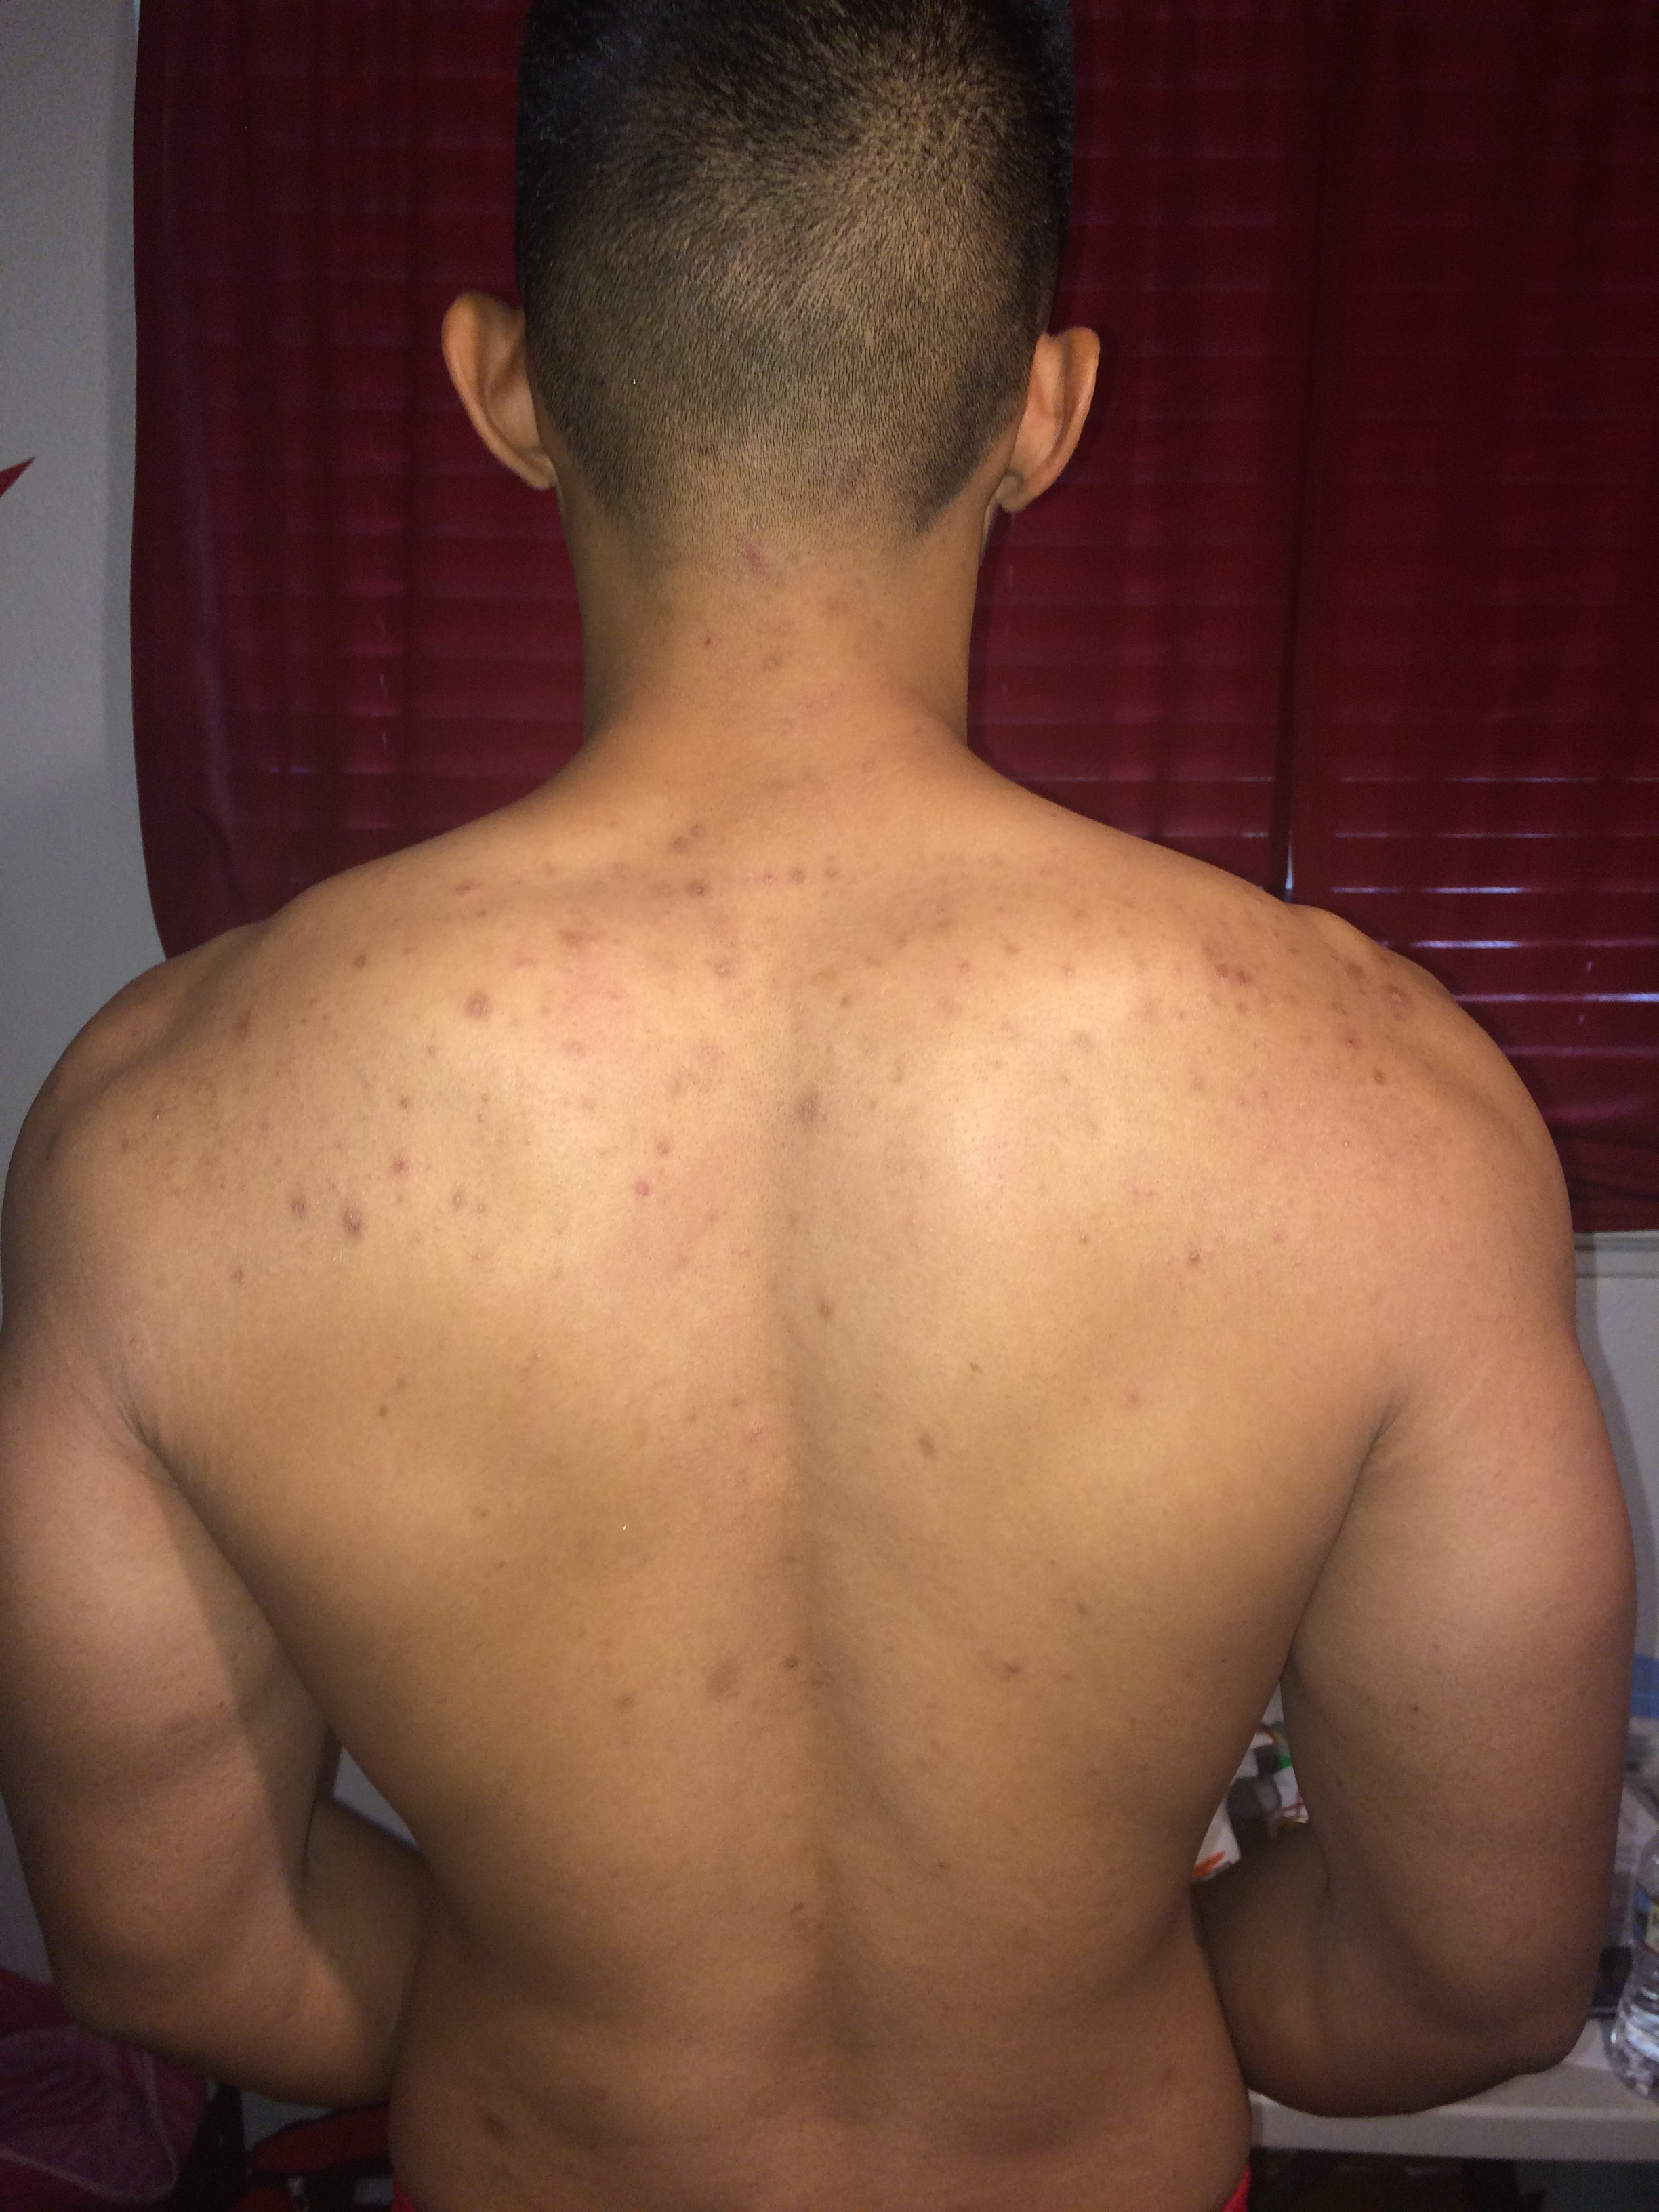 Back Acne Scars Need Advice With Photos Hyperpigmentation Red